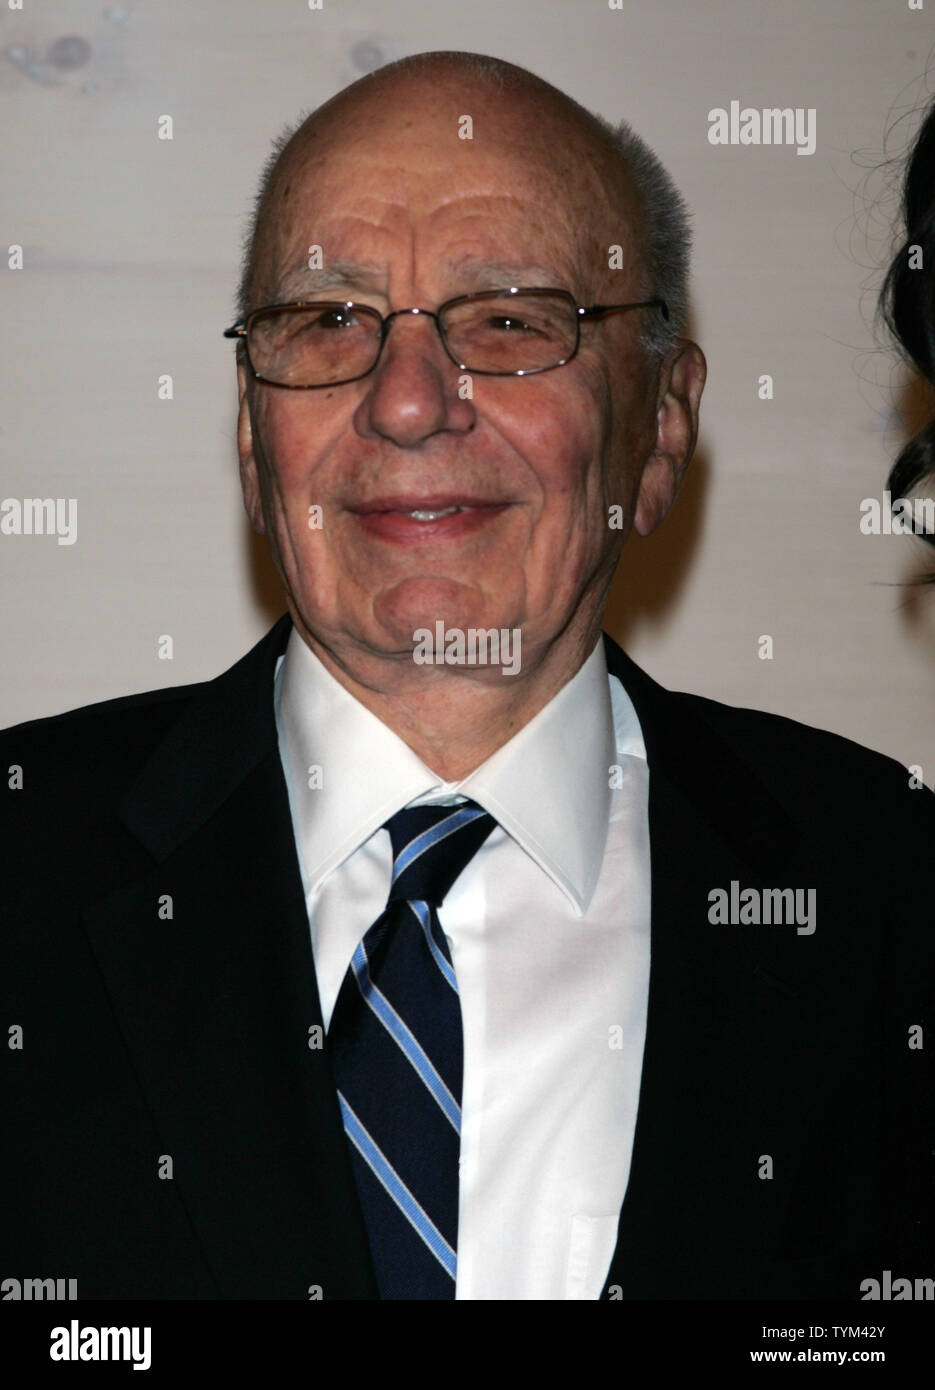 Rupert  Murdoch arrives for the Museum of Modern Art Film Benefit tribute to Kathryn Bigelow at MoMA in New York on November 10, 2010.       UPI /Laura Cavanaugh Stock Photo